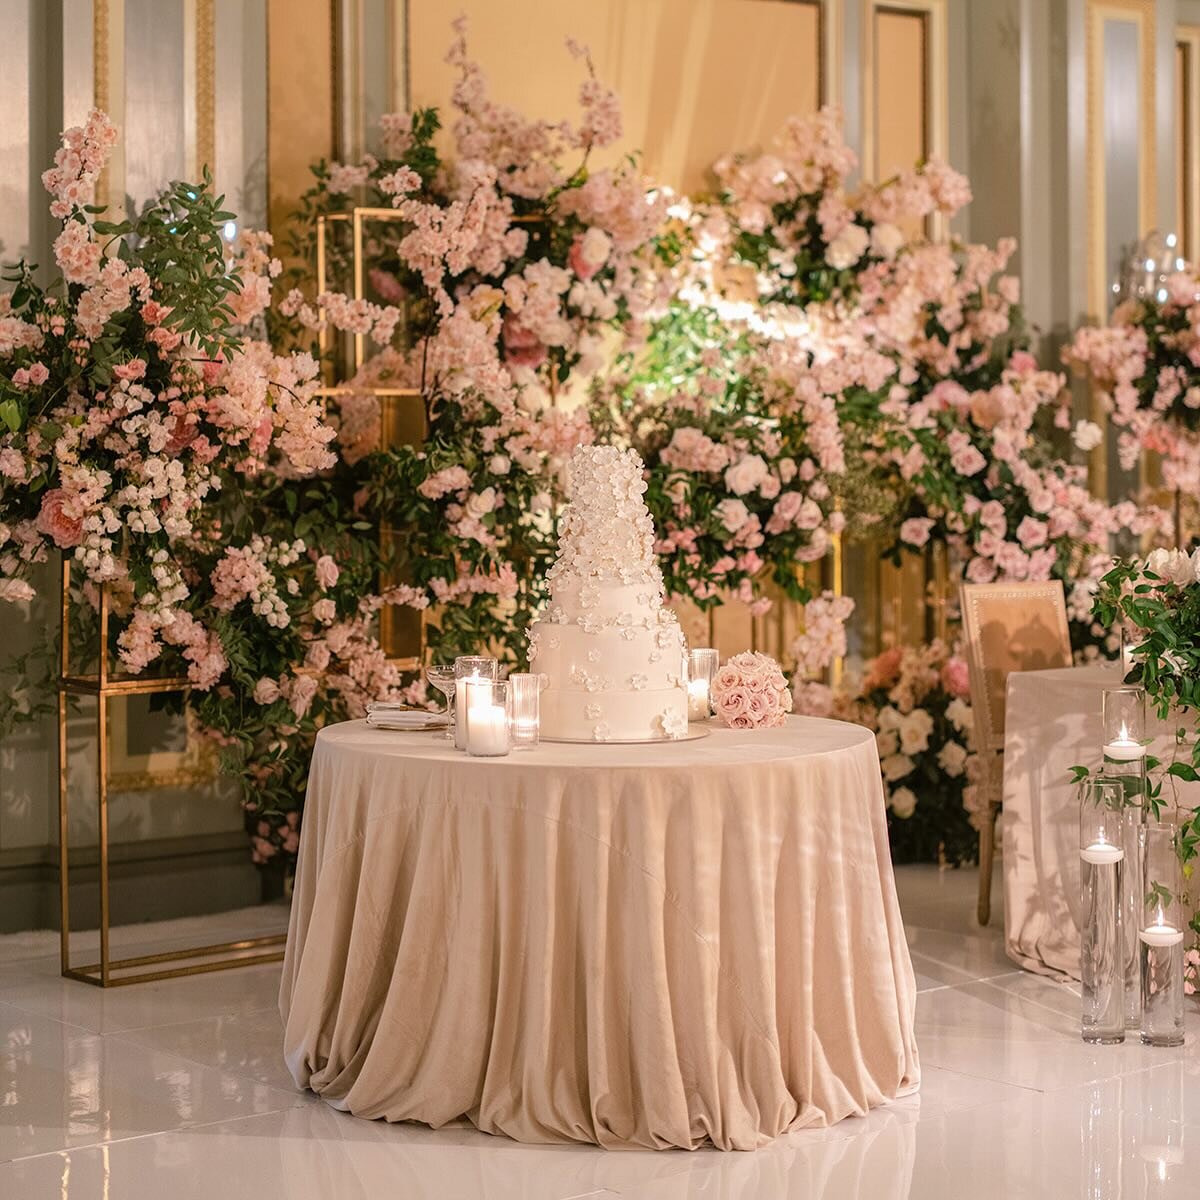 Every cake deserves its moment to shine!

Image by our dear friend @carolinetran cc @sohappitogether @bloomboxdesigns @langhampasadena @michellembico

#sohappitogether #sohappitogetherweddings #luxurywedding #luxuryweddingplanner #weddingideas #weddi